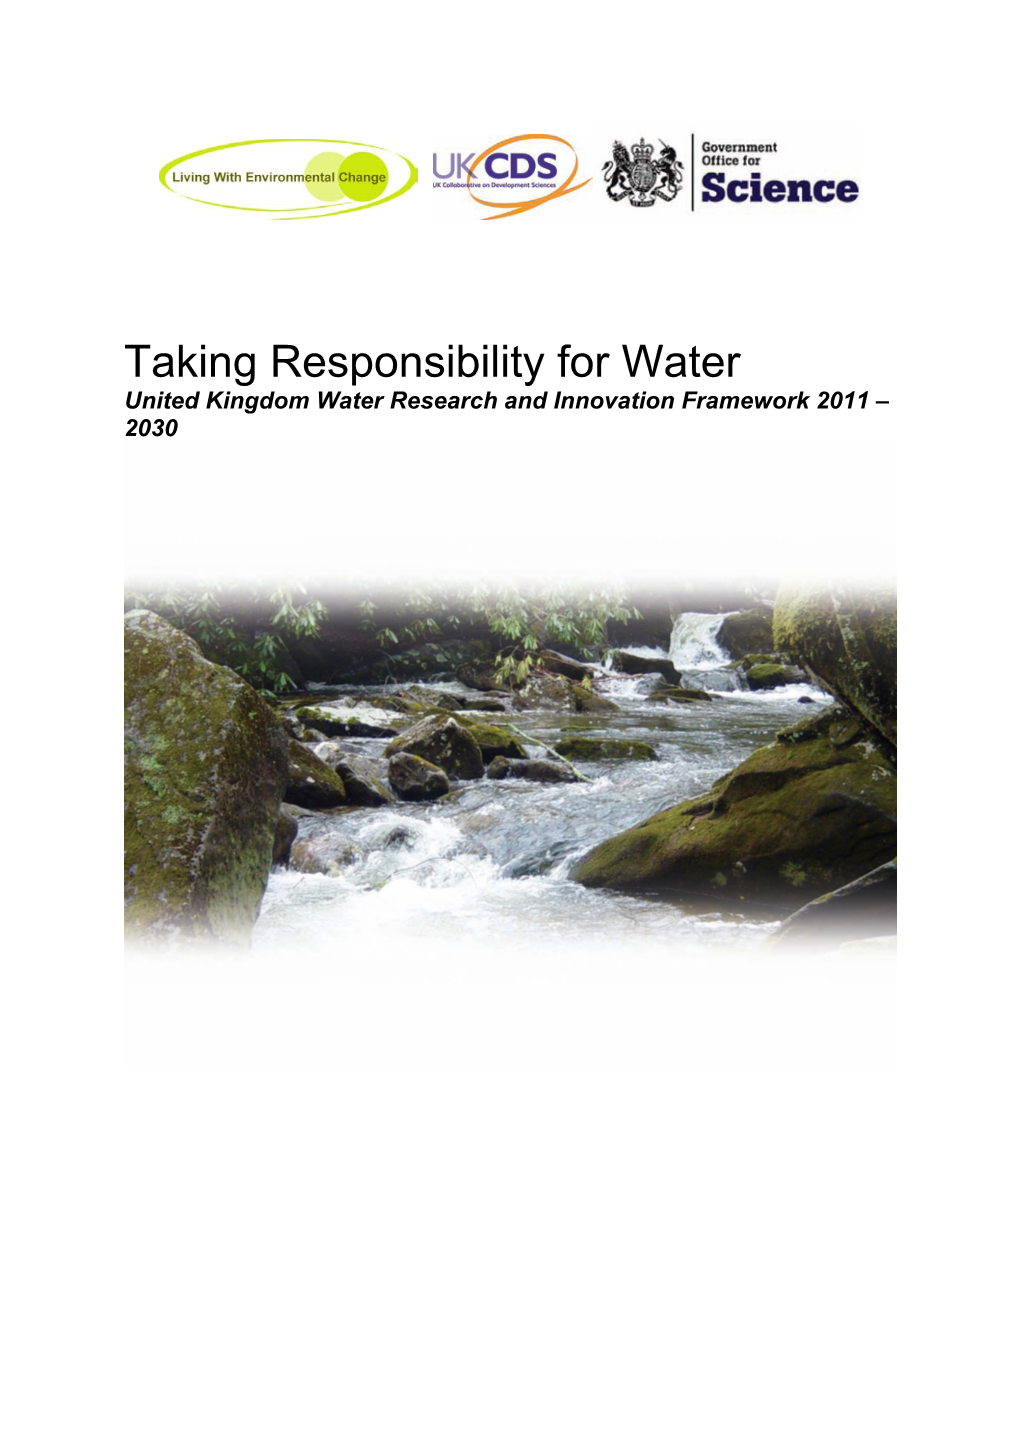 UK Water Research and Innovation Framework 2011 to 2030